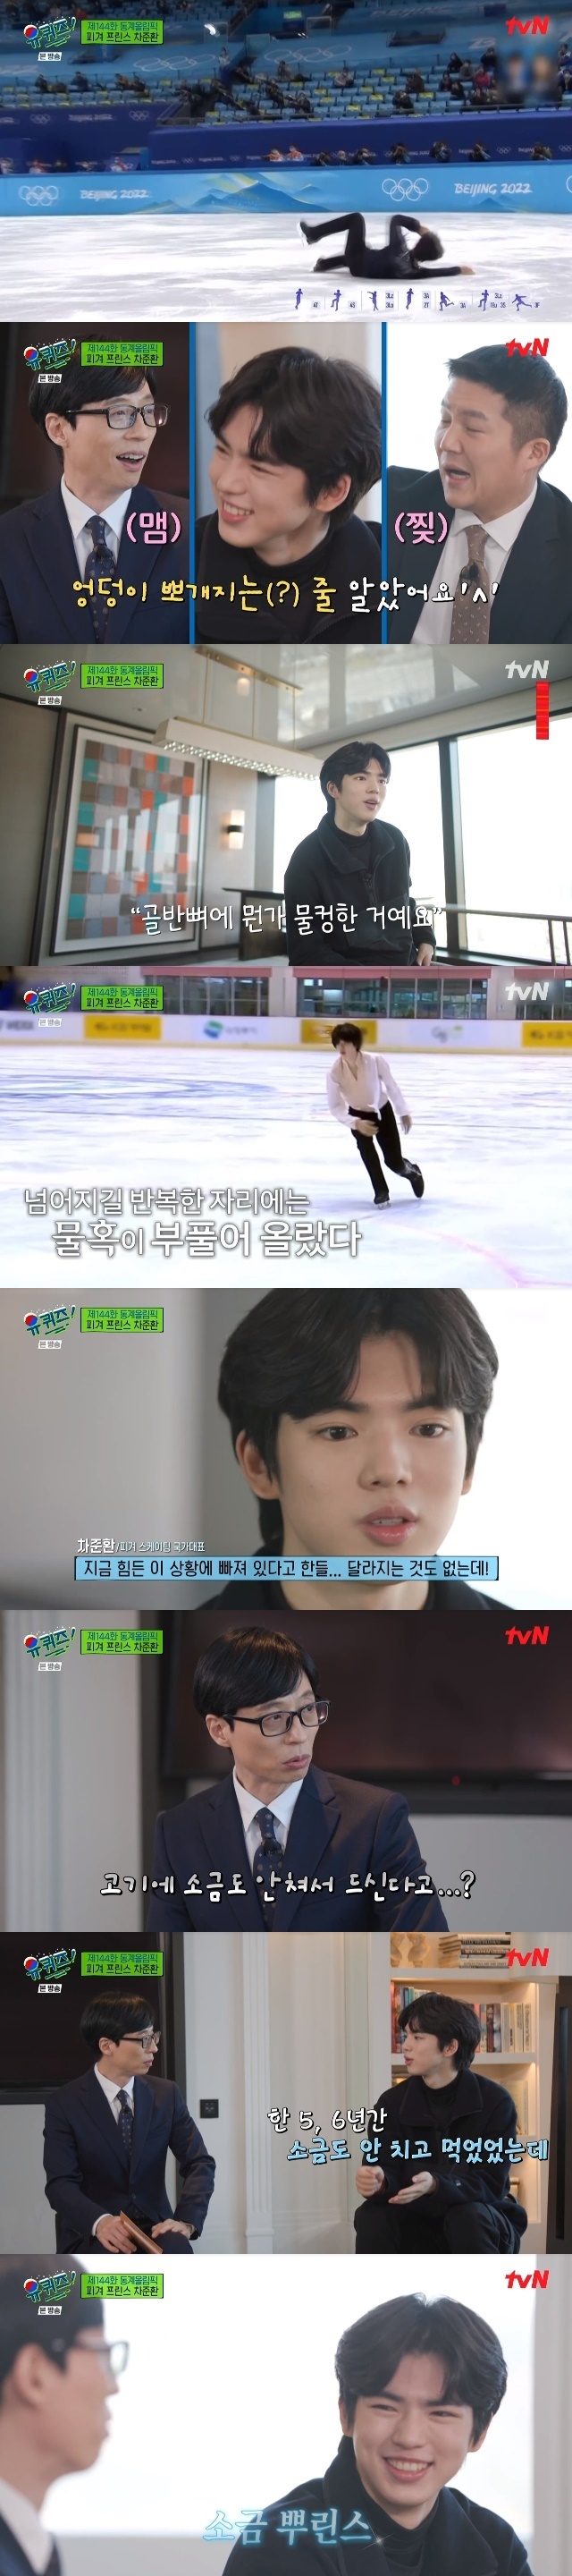 The male figure skater Cha Jun-hwan has focused his attention on the things he has endured as a national representative such as injuries and weight management.In the 144th episode of tvN You Quiz on the Block (hereinafter referred to as You Quiz on the Block), which was broadcast on March 2, figure skating national team Cha Jun-hwan appeared as a guest in the 2022 Beijing Winter Olympics special feature.Cha Joon-hwan has been ranked fifth in the world by breaking his personal best at the Beijing Olympics in 2022.Cha Joon-hwan fell down hard while trying to jump four times in the free program at the time of Kyonggi. When asked if he was sick, Cha said, I thought my ass was getting sick.I am still a little sick, he said honestly, causing laughter.Cha Jun-hwan said, I was actually a little upset and I was a little angry about the fact that I was acting hard despite being so sick.I was angry because I was so successful in practice, but I had to do better than the mistake now. Cha Jun-hwans national mind continued when he was injured. Cha Jun-hwan said, It was just before the first round.Short Kyonggi It was two days ago, but I fell so much that I lay down to sleep and touched my buttocks, but something was pelvic.I thought, Youre not cold. The next day, I went to the hospital and found that the water was full. I fell and bruised and my cells died and my water swelled.I took the water out and wrapped it in a pressure bandage, skated, and when I unwound it, the water was cold again.I dont care about injuries at all. I think Im getting weaker. Im trying to get to Kyonggi stronger.I am in a difficult situation, but there is no change, but I have to get better and lively. Cha Jun-hwan also thoroughly managed his diet. Cha Jun-hwan said, The food he takes when he goes abroad is energy bar. He always eats an energy bar during a game.For example, if the game is held at 6 p.m., it will be eaten from morning to 6 p.m., and if you eat one bite and exercise, you eat one bite, and you can eat half of it in a day.I have not eaten salt for five or six years, but according to what I heard, I am a sweater and I need salt because I am sweating a lot.So (now) I sprinkle a little salt, he replied, laughing.Cha Jun-hwan, who was a child actor but started figure skating at the age of 8, was training all year and 365 days.Cha Jun-hwan said, I do not train ice from the link hall only on Sunday, and I run alone.The actual hand of Cha Jun-hwan was full of hard skin, unlike his fine appearance, all of which were traces of tight skate straps.Cha Jun-hwan mentioned everyday life that is normal as he gave up to be here. However, Cha Jun-hwan said, In some ways, I think I got other things.I want to feel such a precious experience rather than thinking about losing it. 